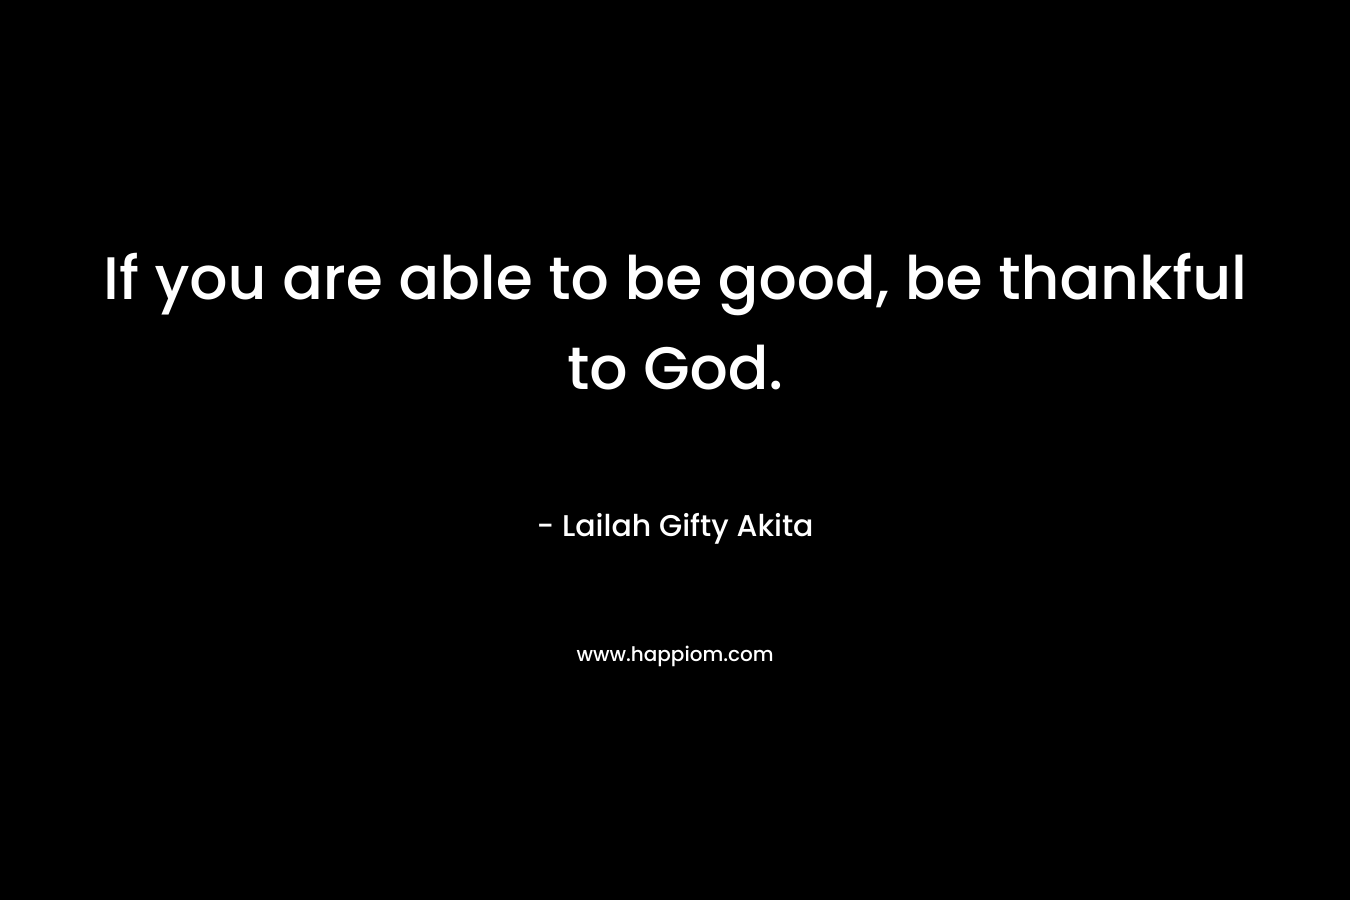 If you are able to be good, be thankful to God.